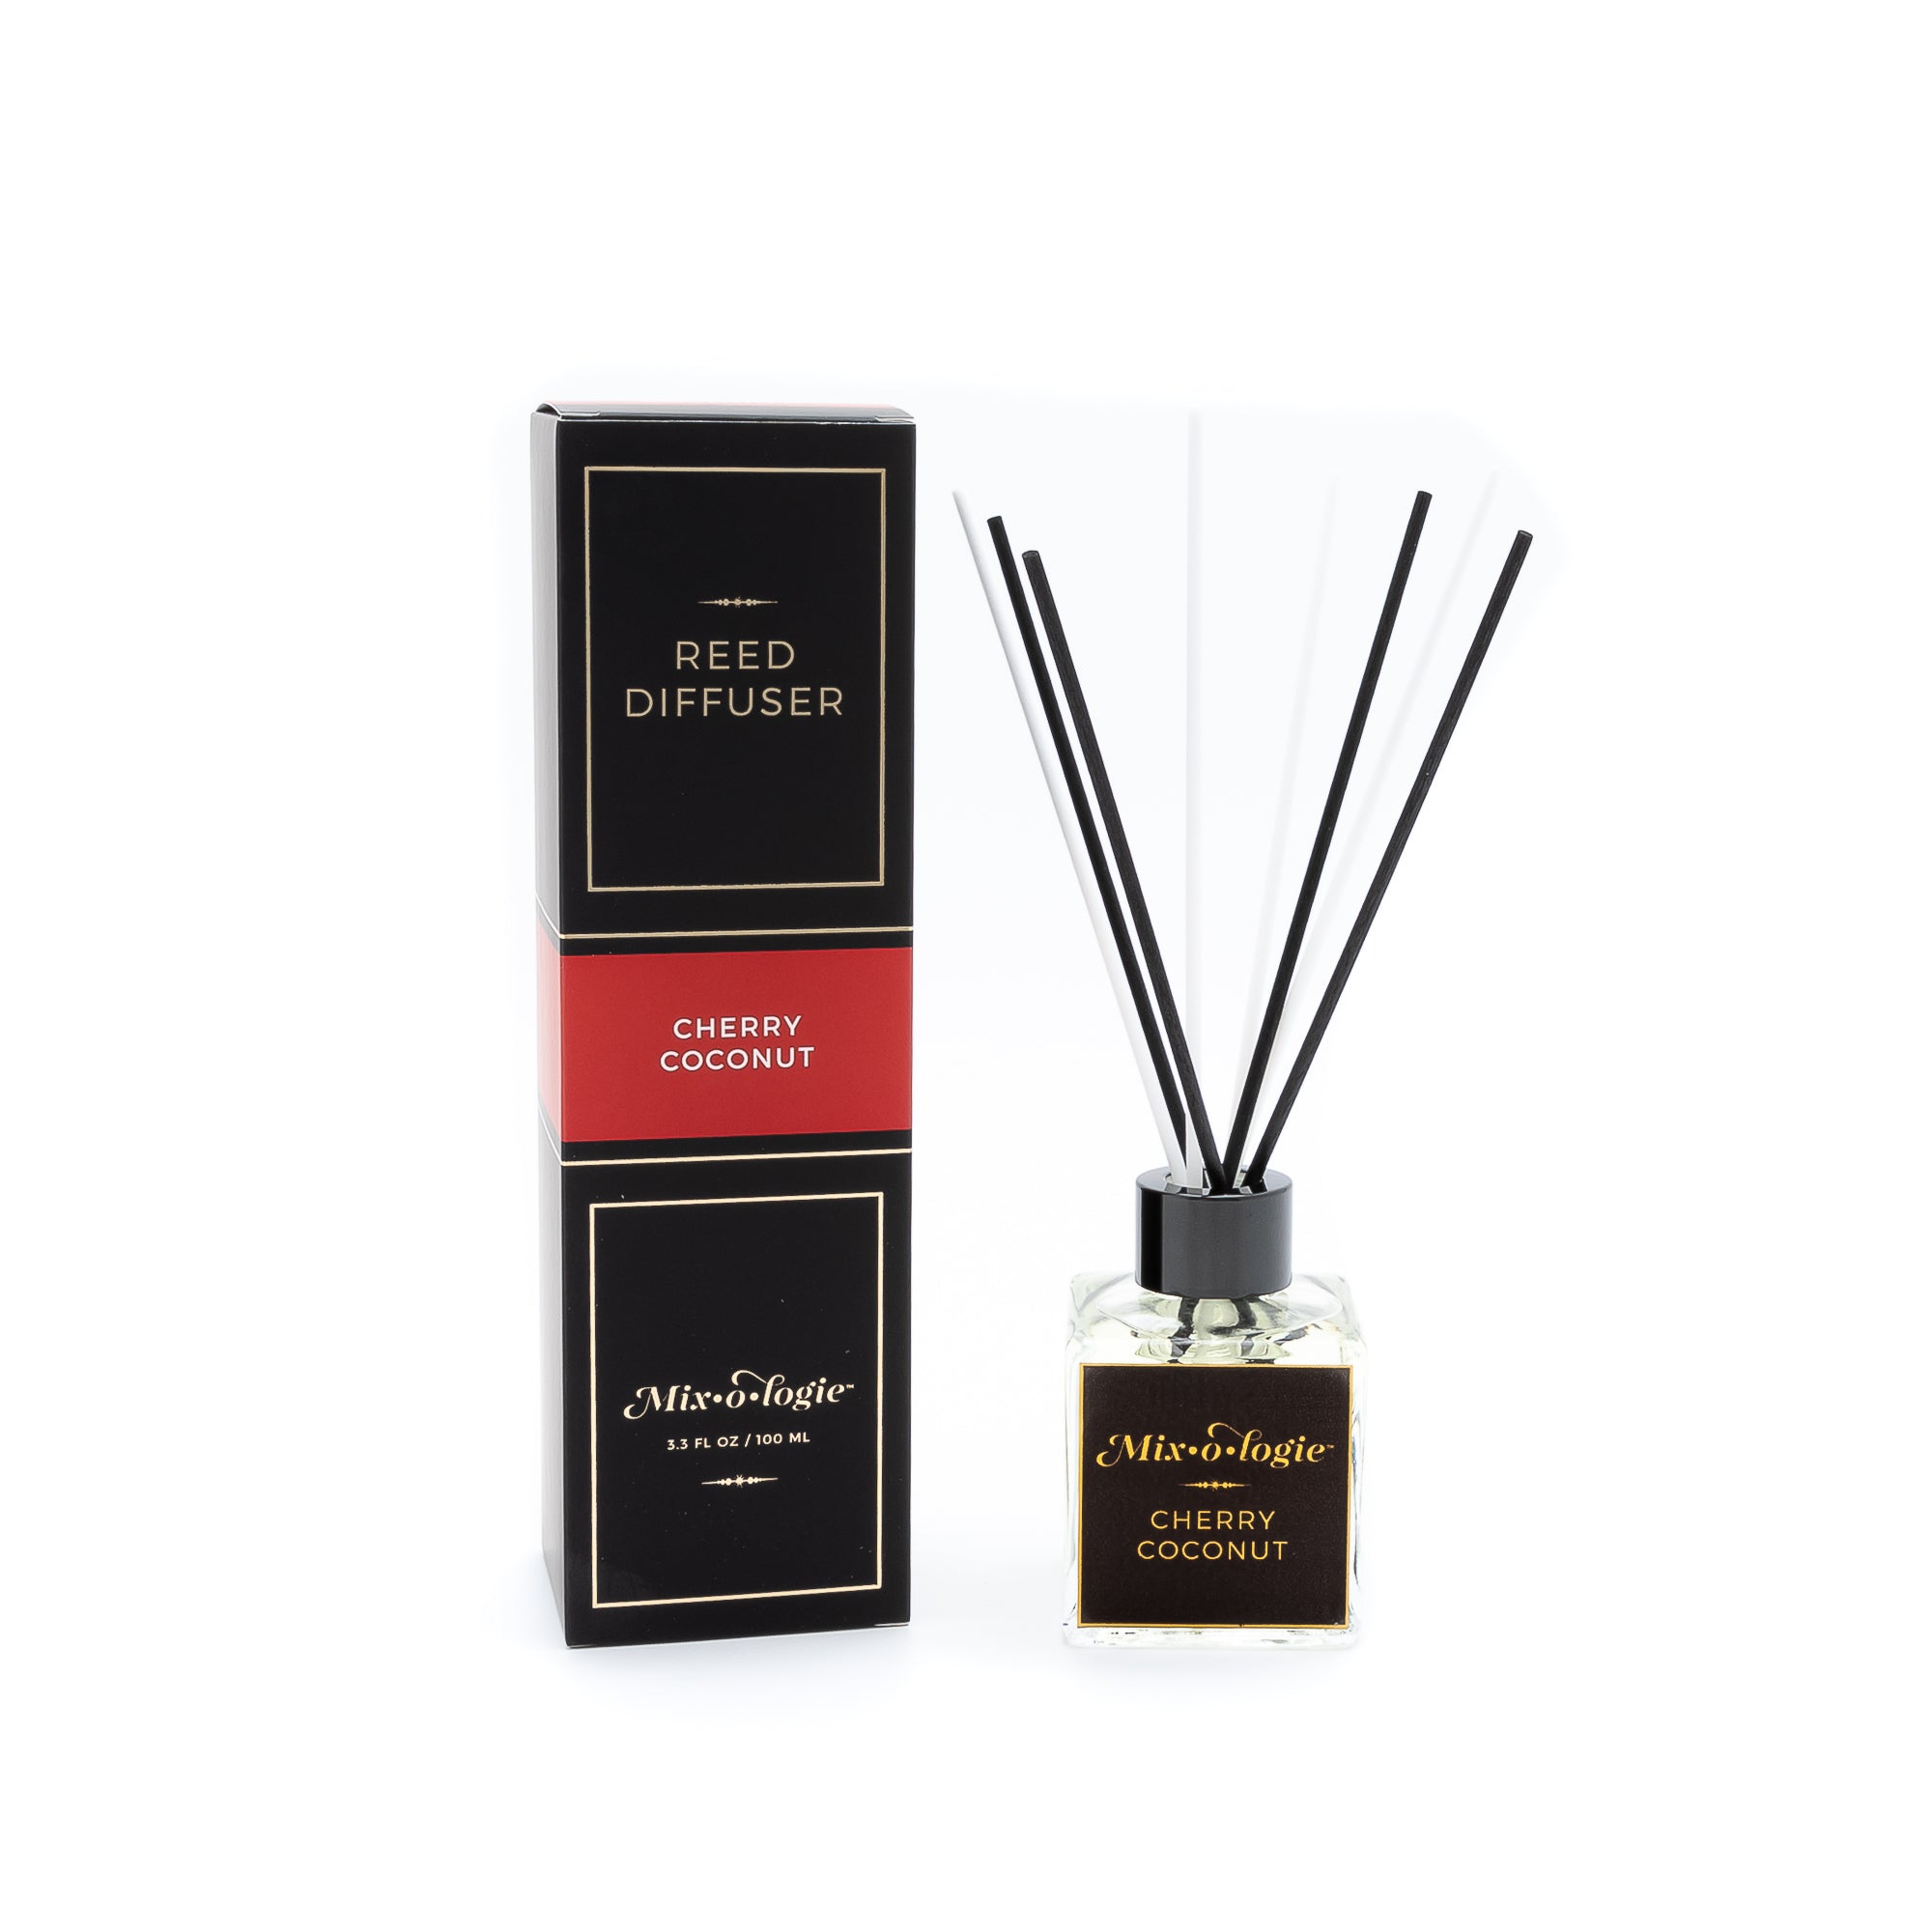 Cherry Coconut Reed Diffuser